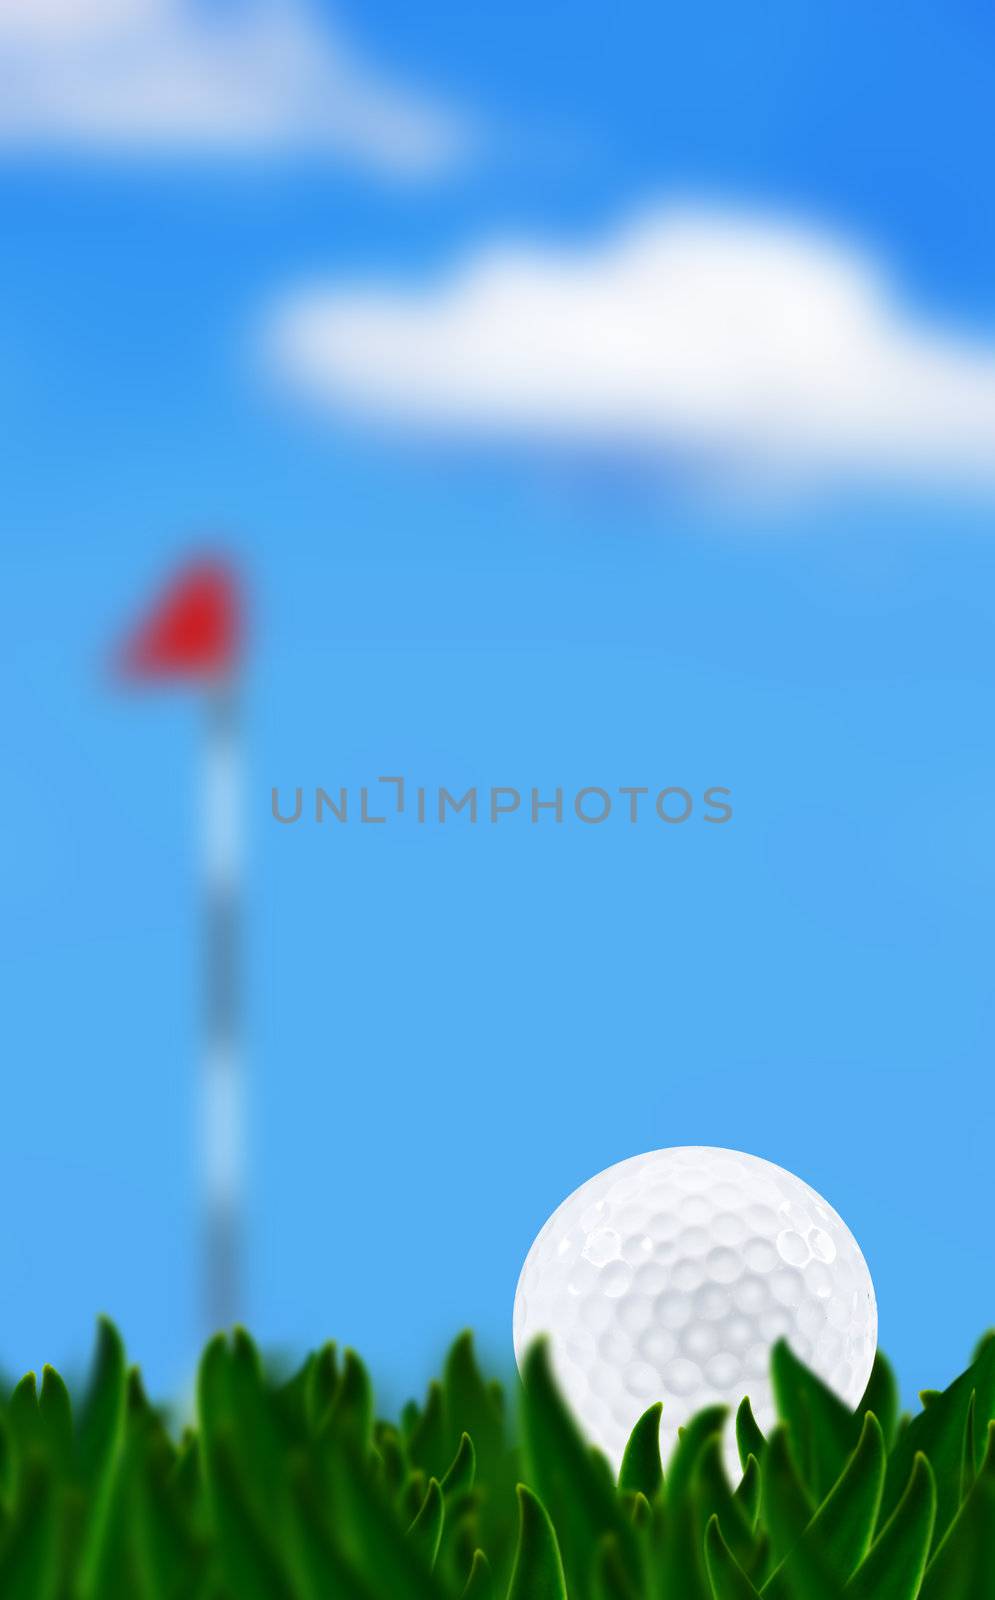 Golf ball on a golf course with the green in the background - very shallow depth of field by tish1